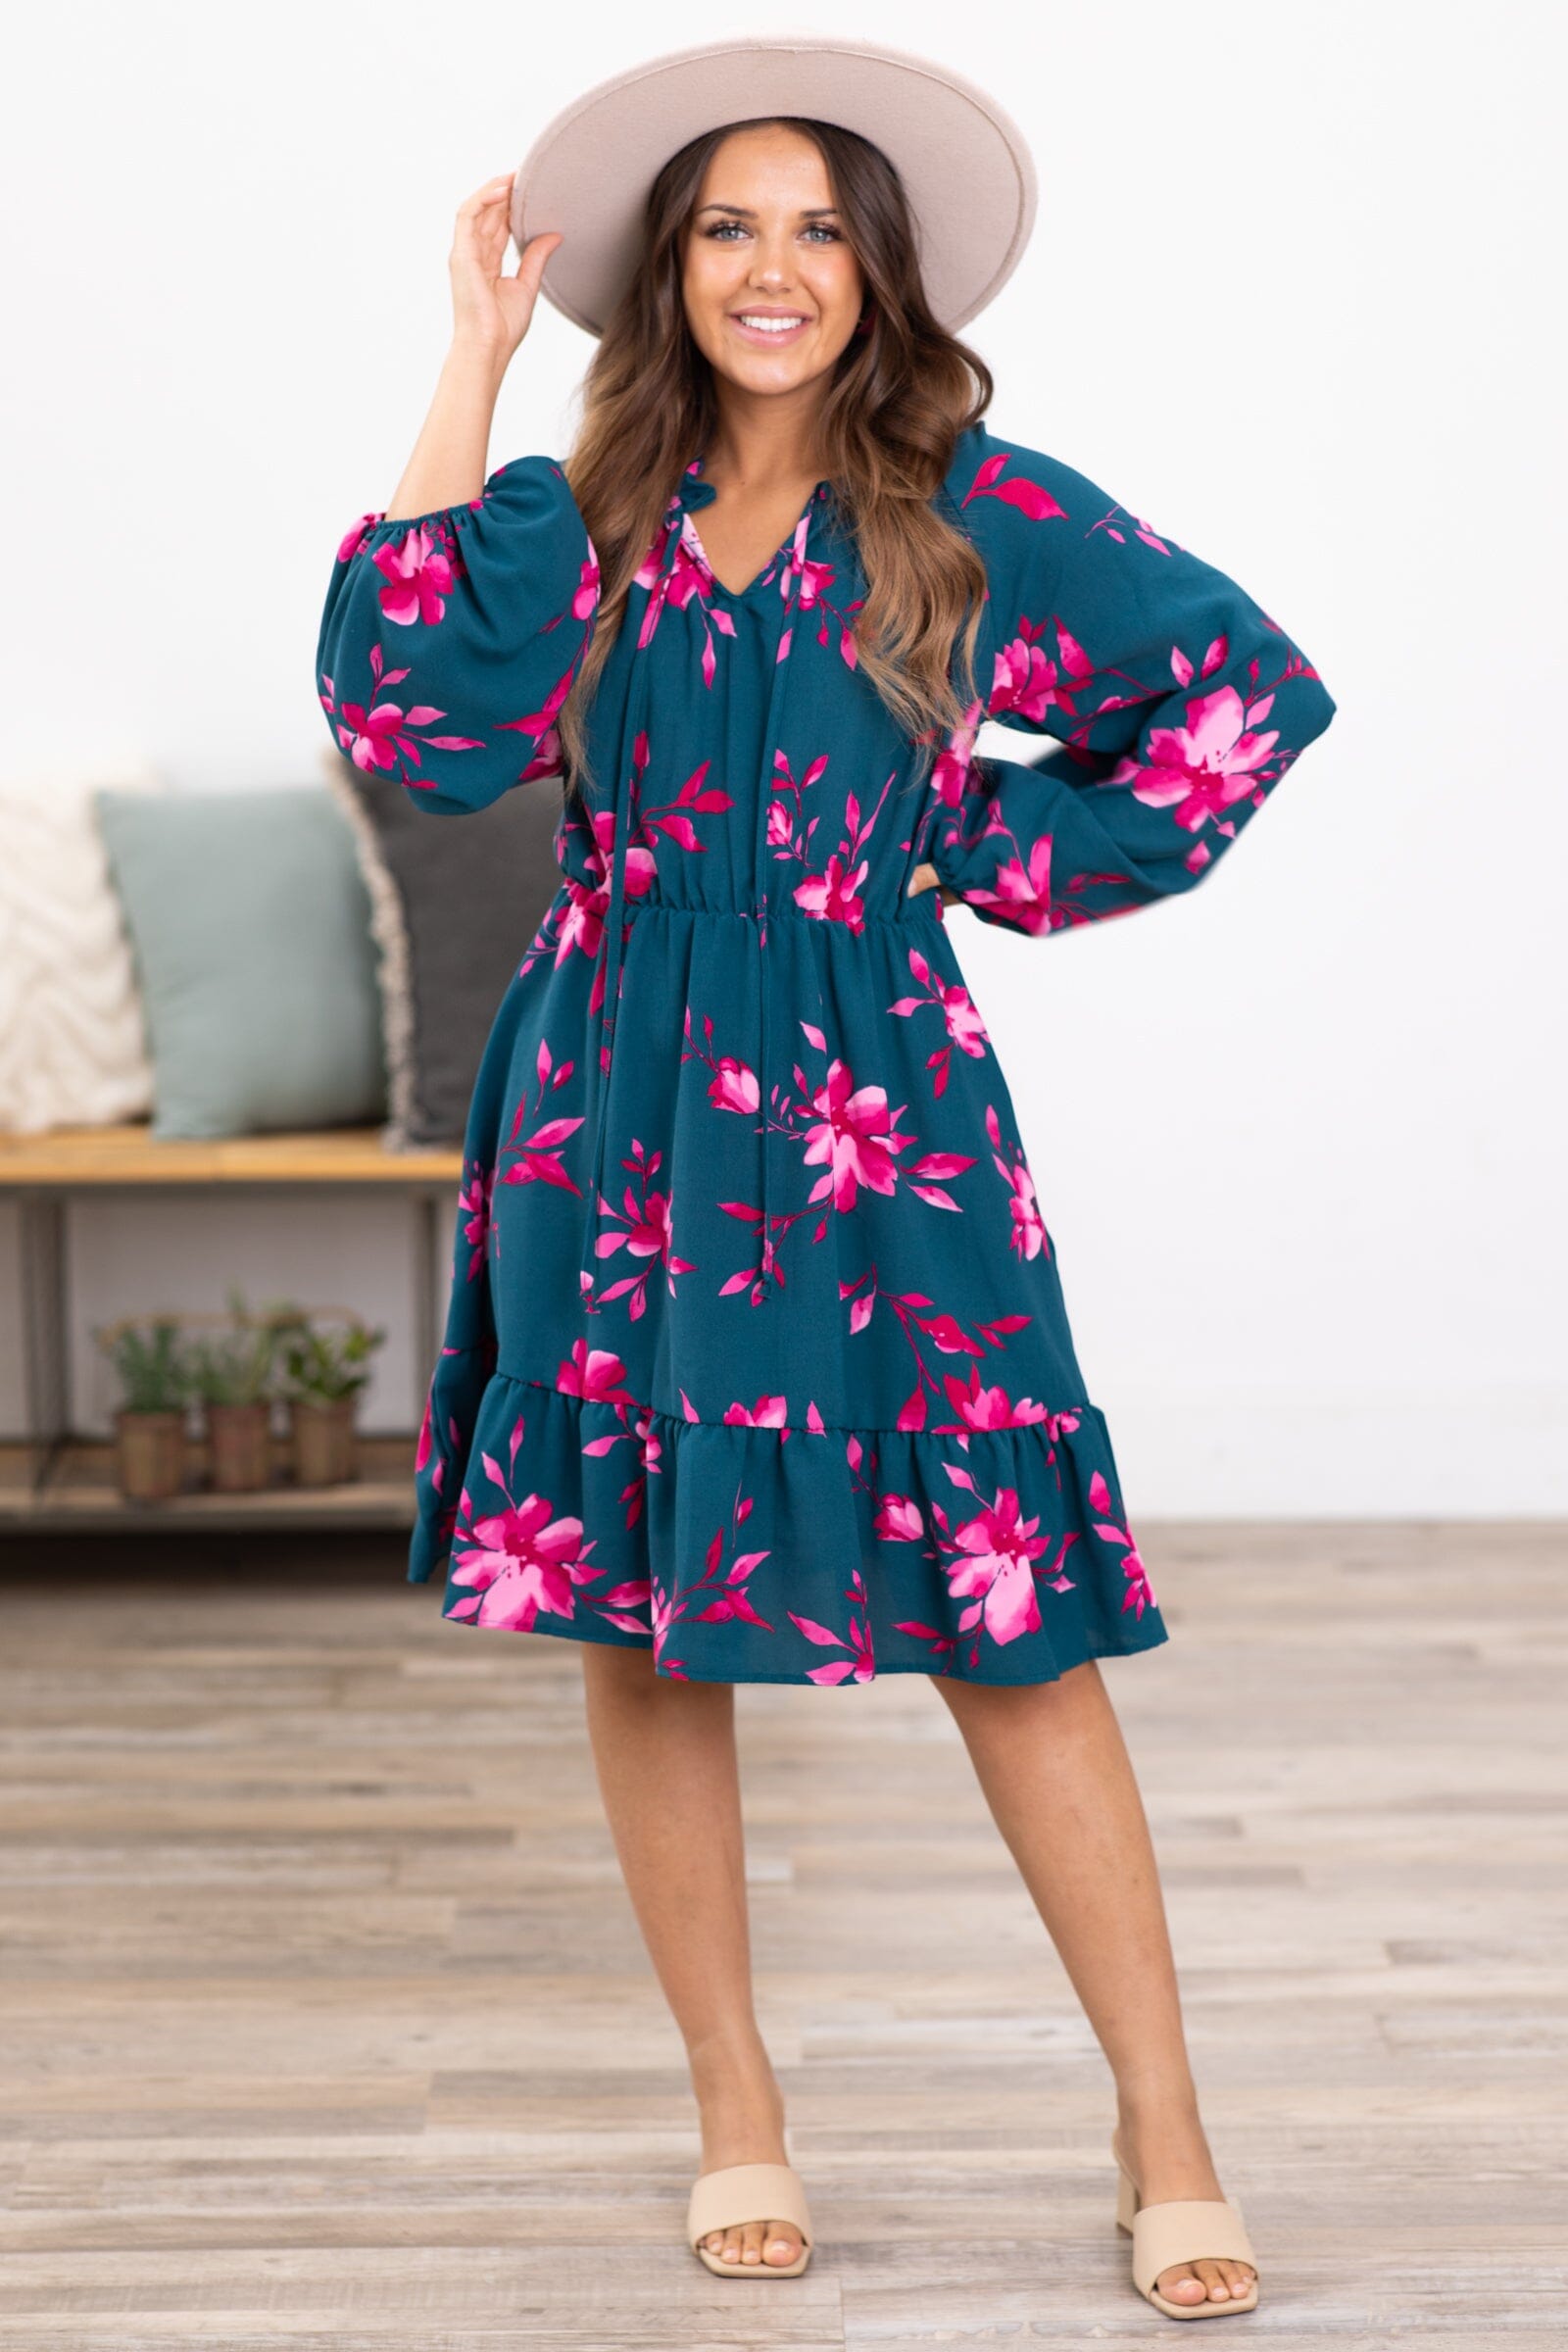 Teal and Fuchsia Floral Long Sleeve Dress - Filly Flair